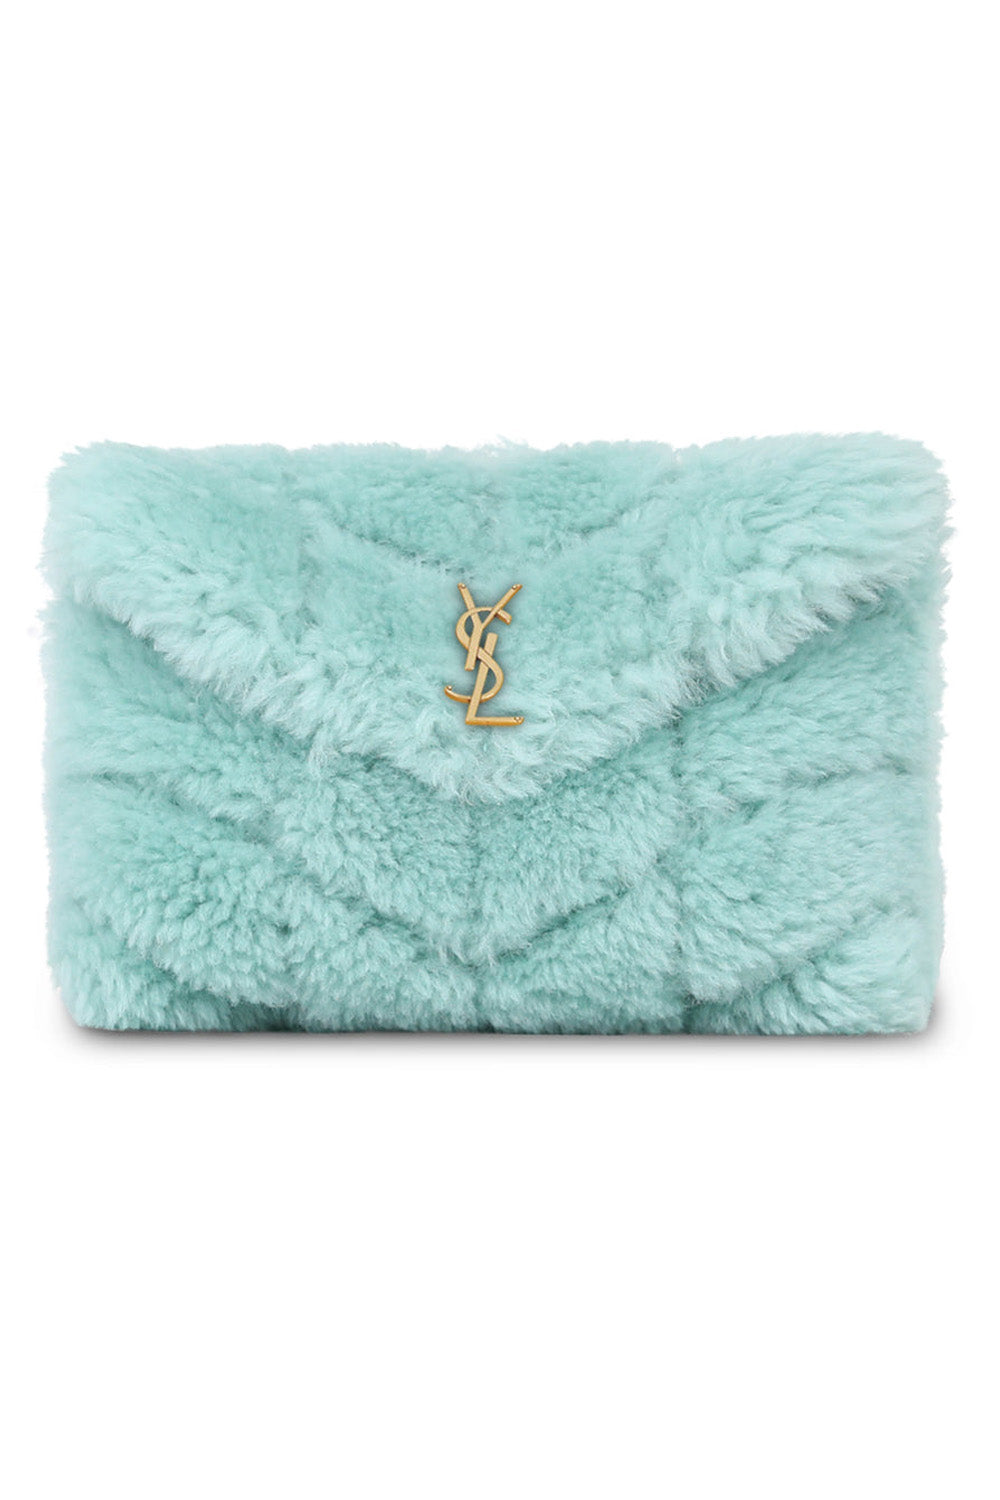 SAINT LAURENT BAGS GREEN LOULOU SHEARLING PUFFER POUCH | ICED MINT